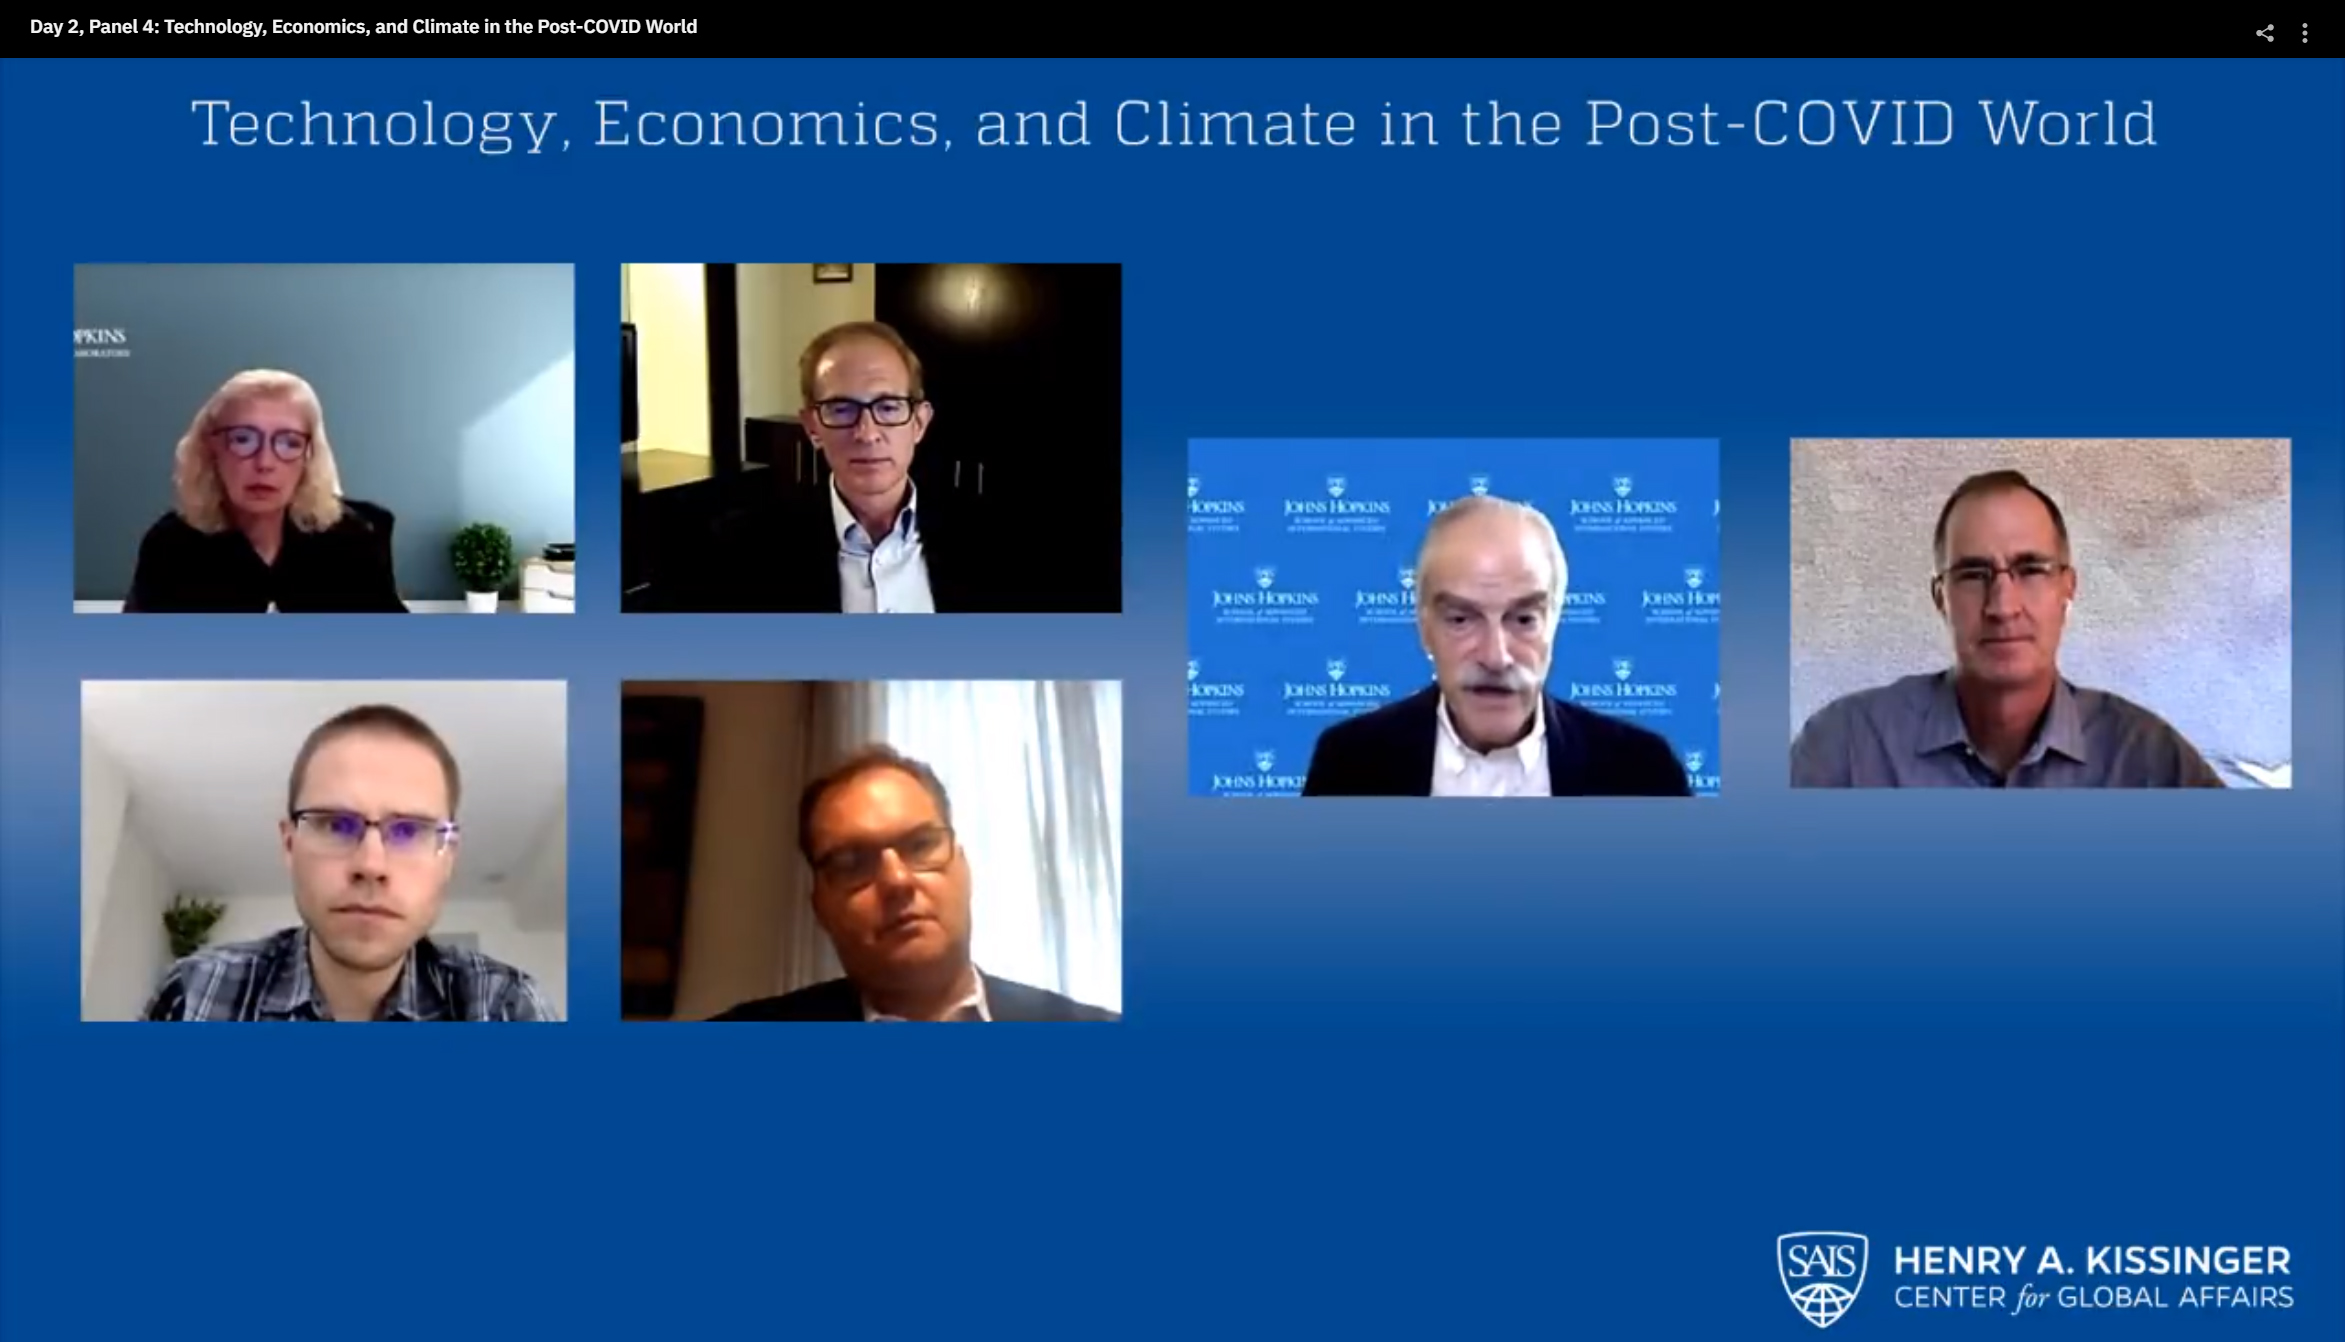 A panel discussing technology, economics and climate in the post-COVID world